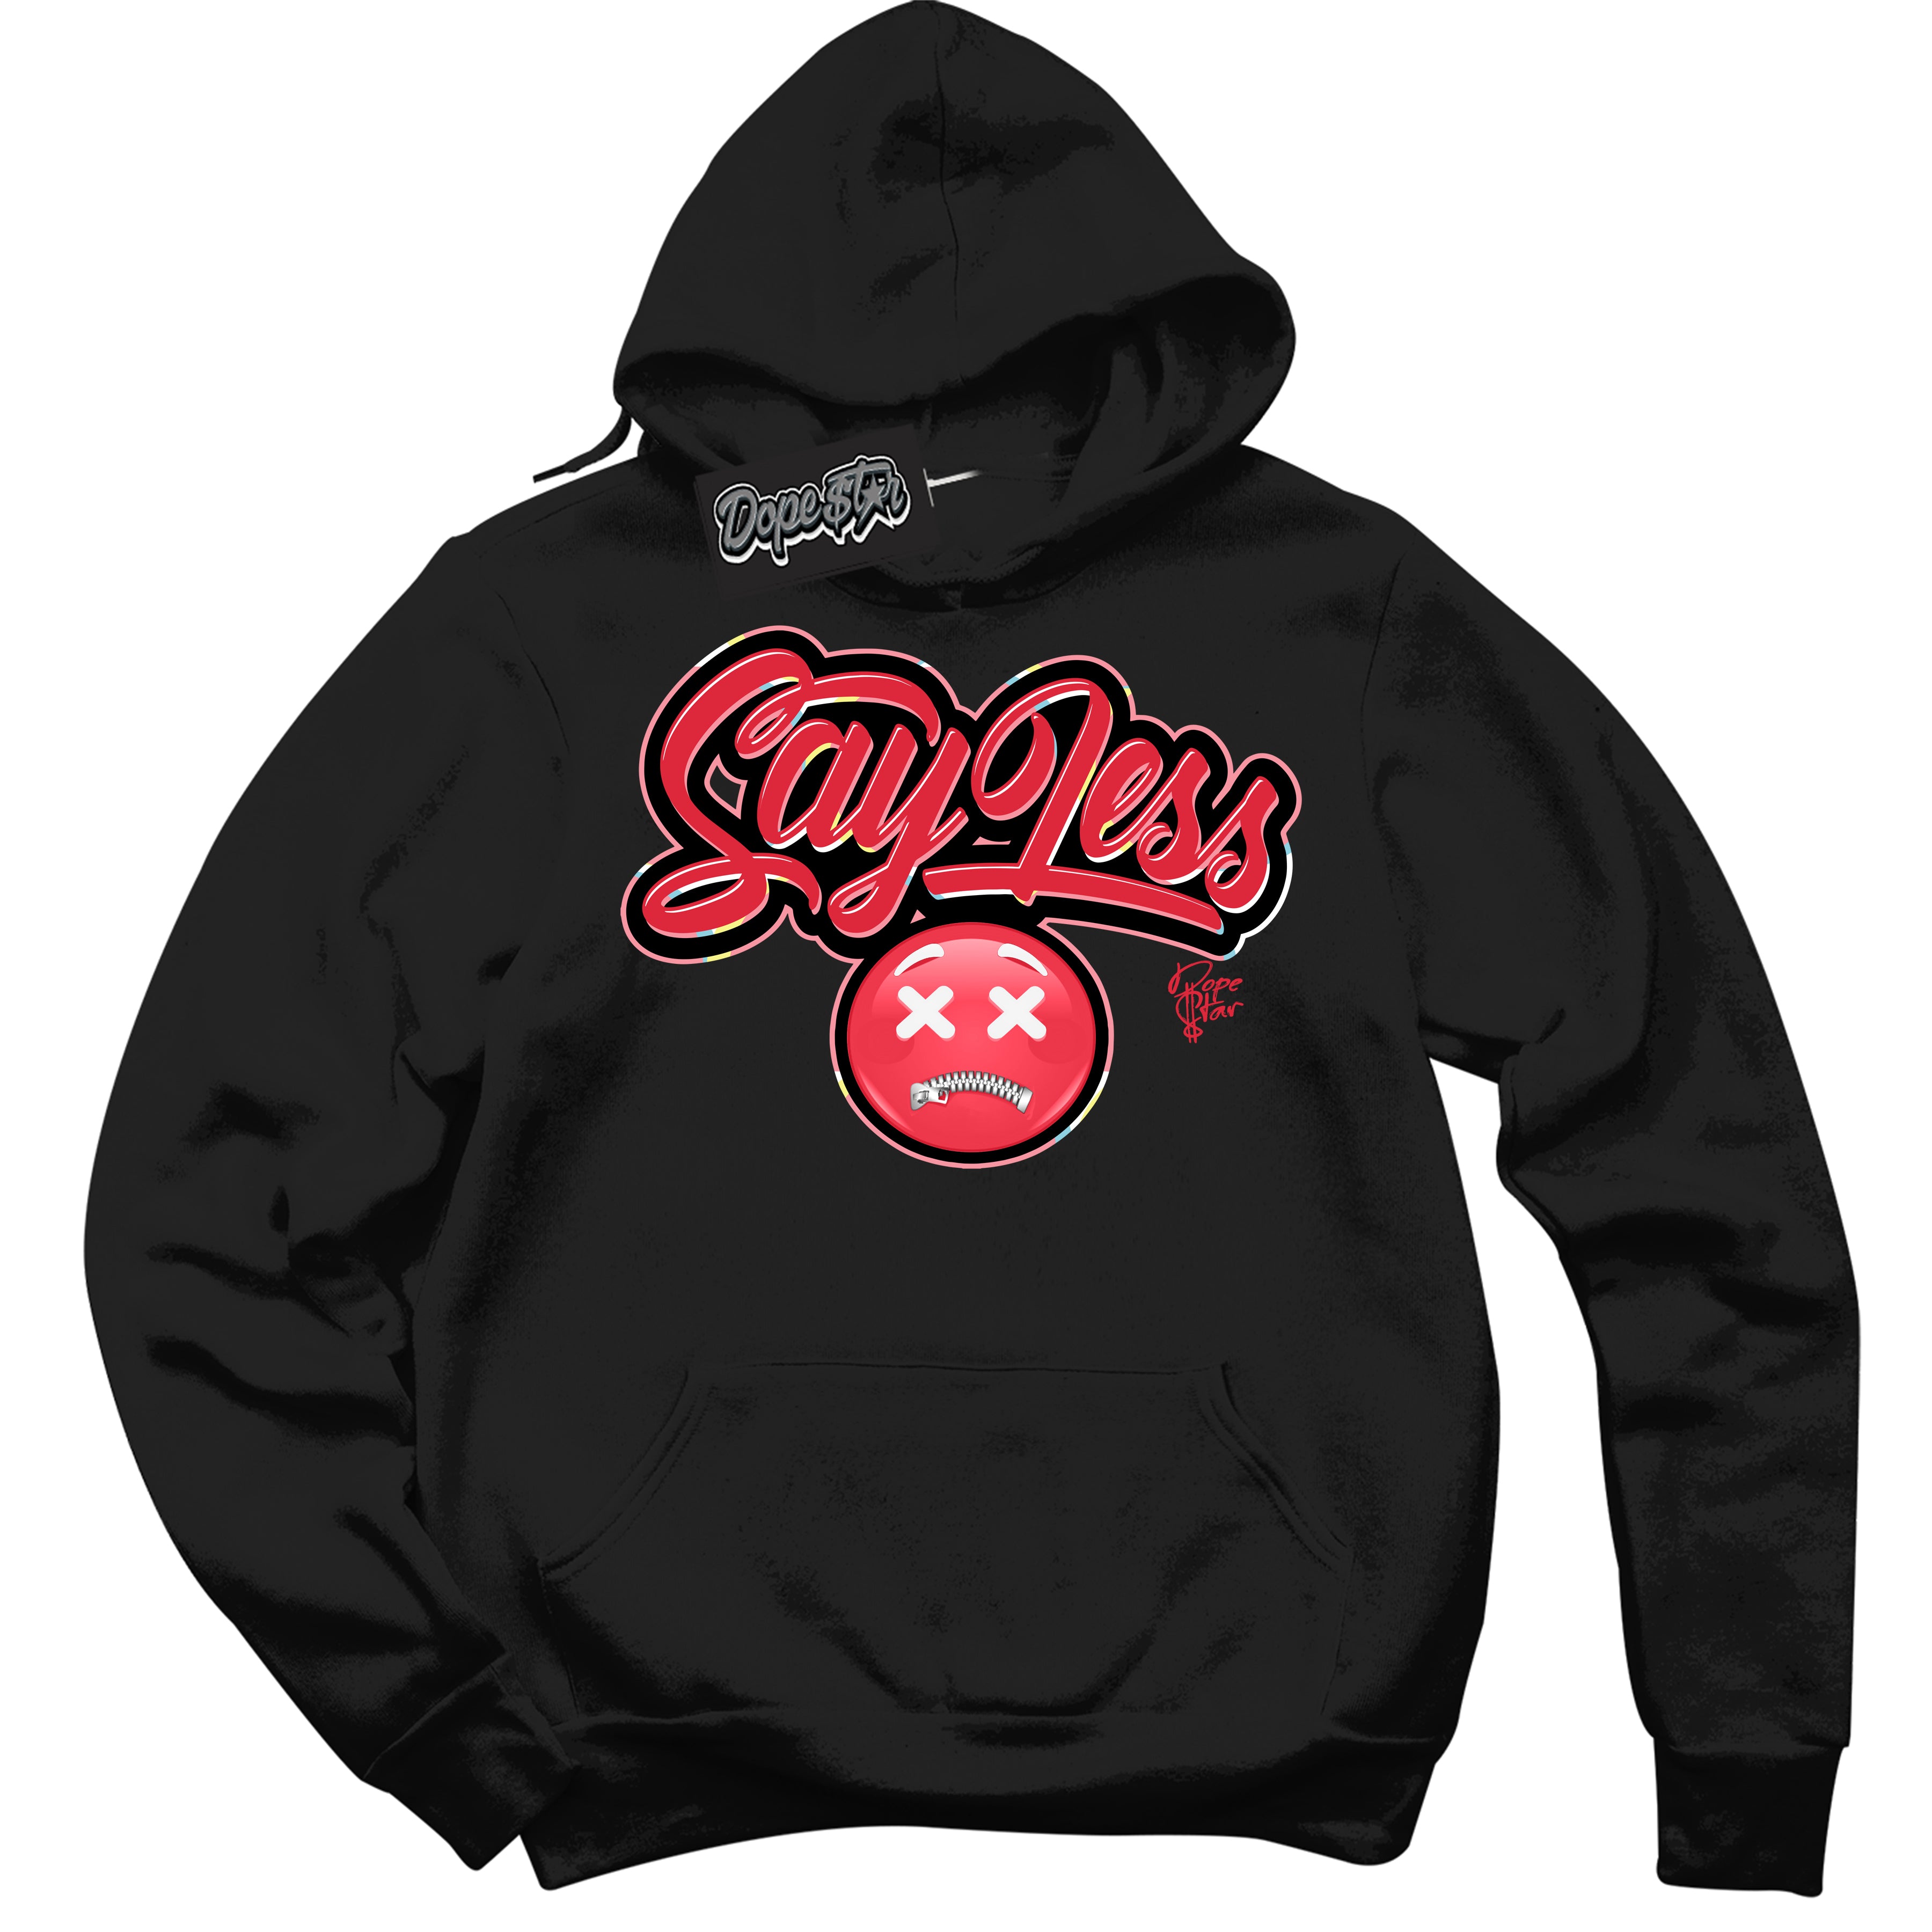 Cool Black Graphic DopeStar Hoodie with “ Say Less “ print, that perfectly matches Spider-Verse 1s sneakers